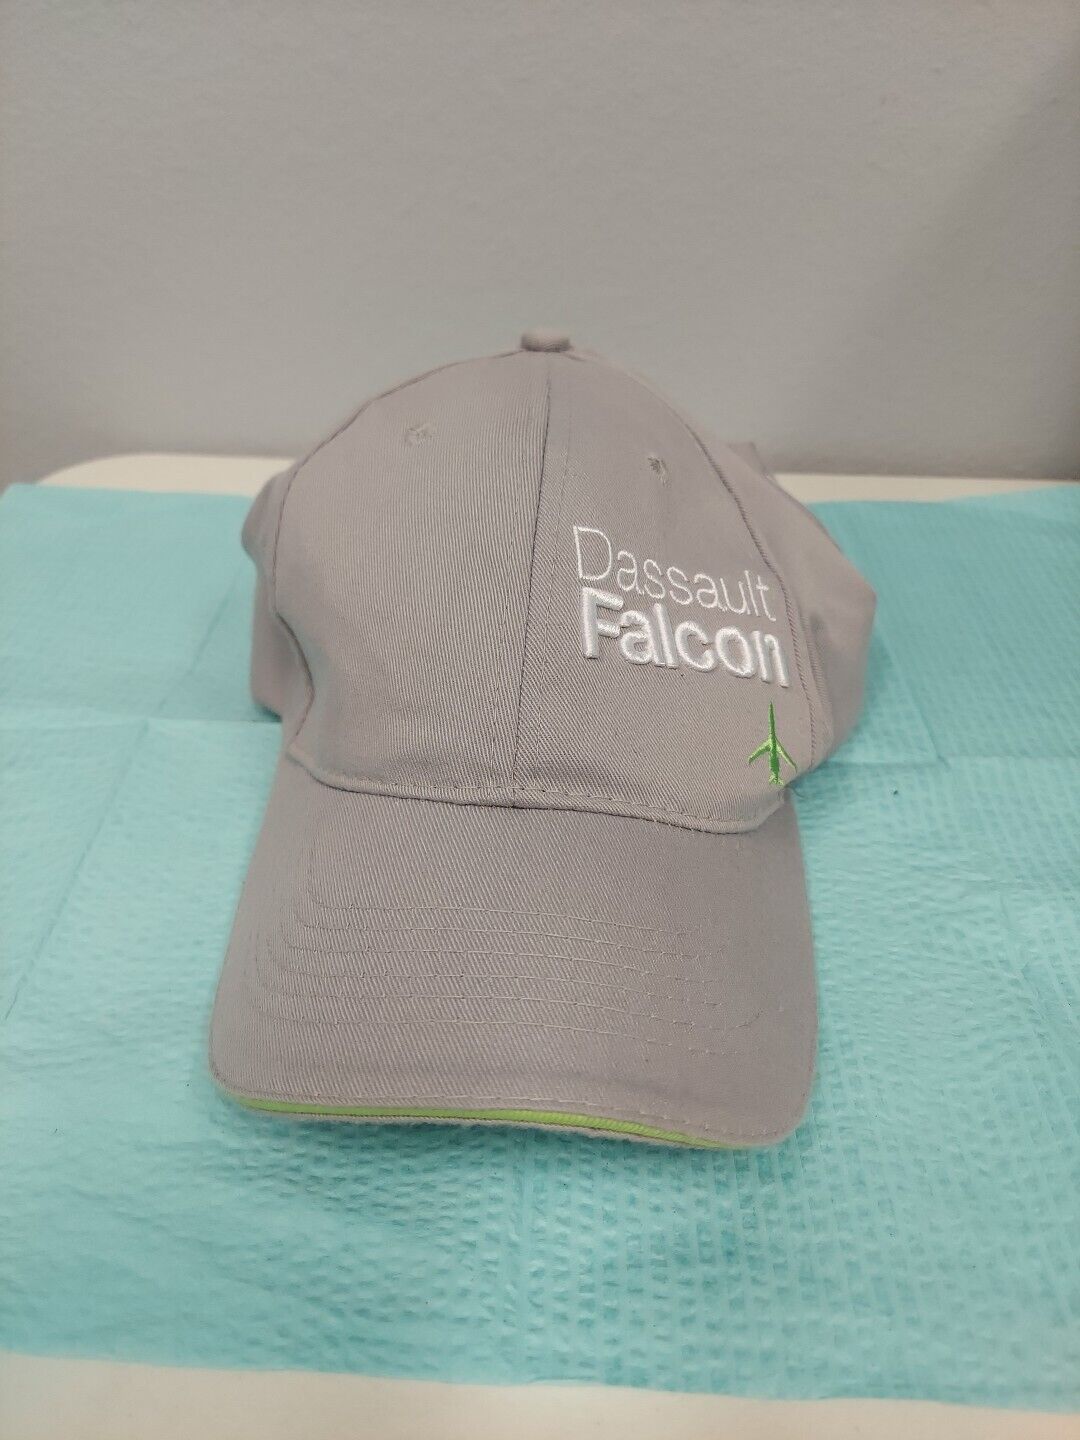 Dassault Falcon Airplane Adult Baseball Cap Gray In Color With Green Strap